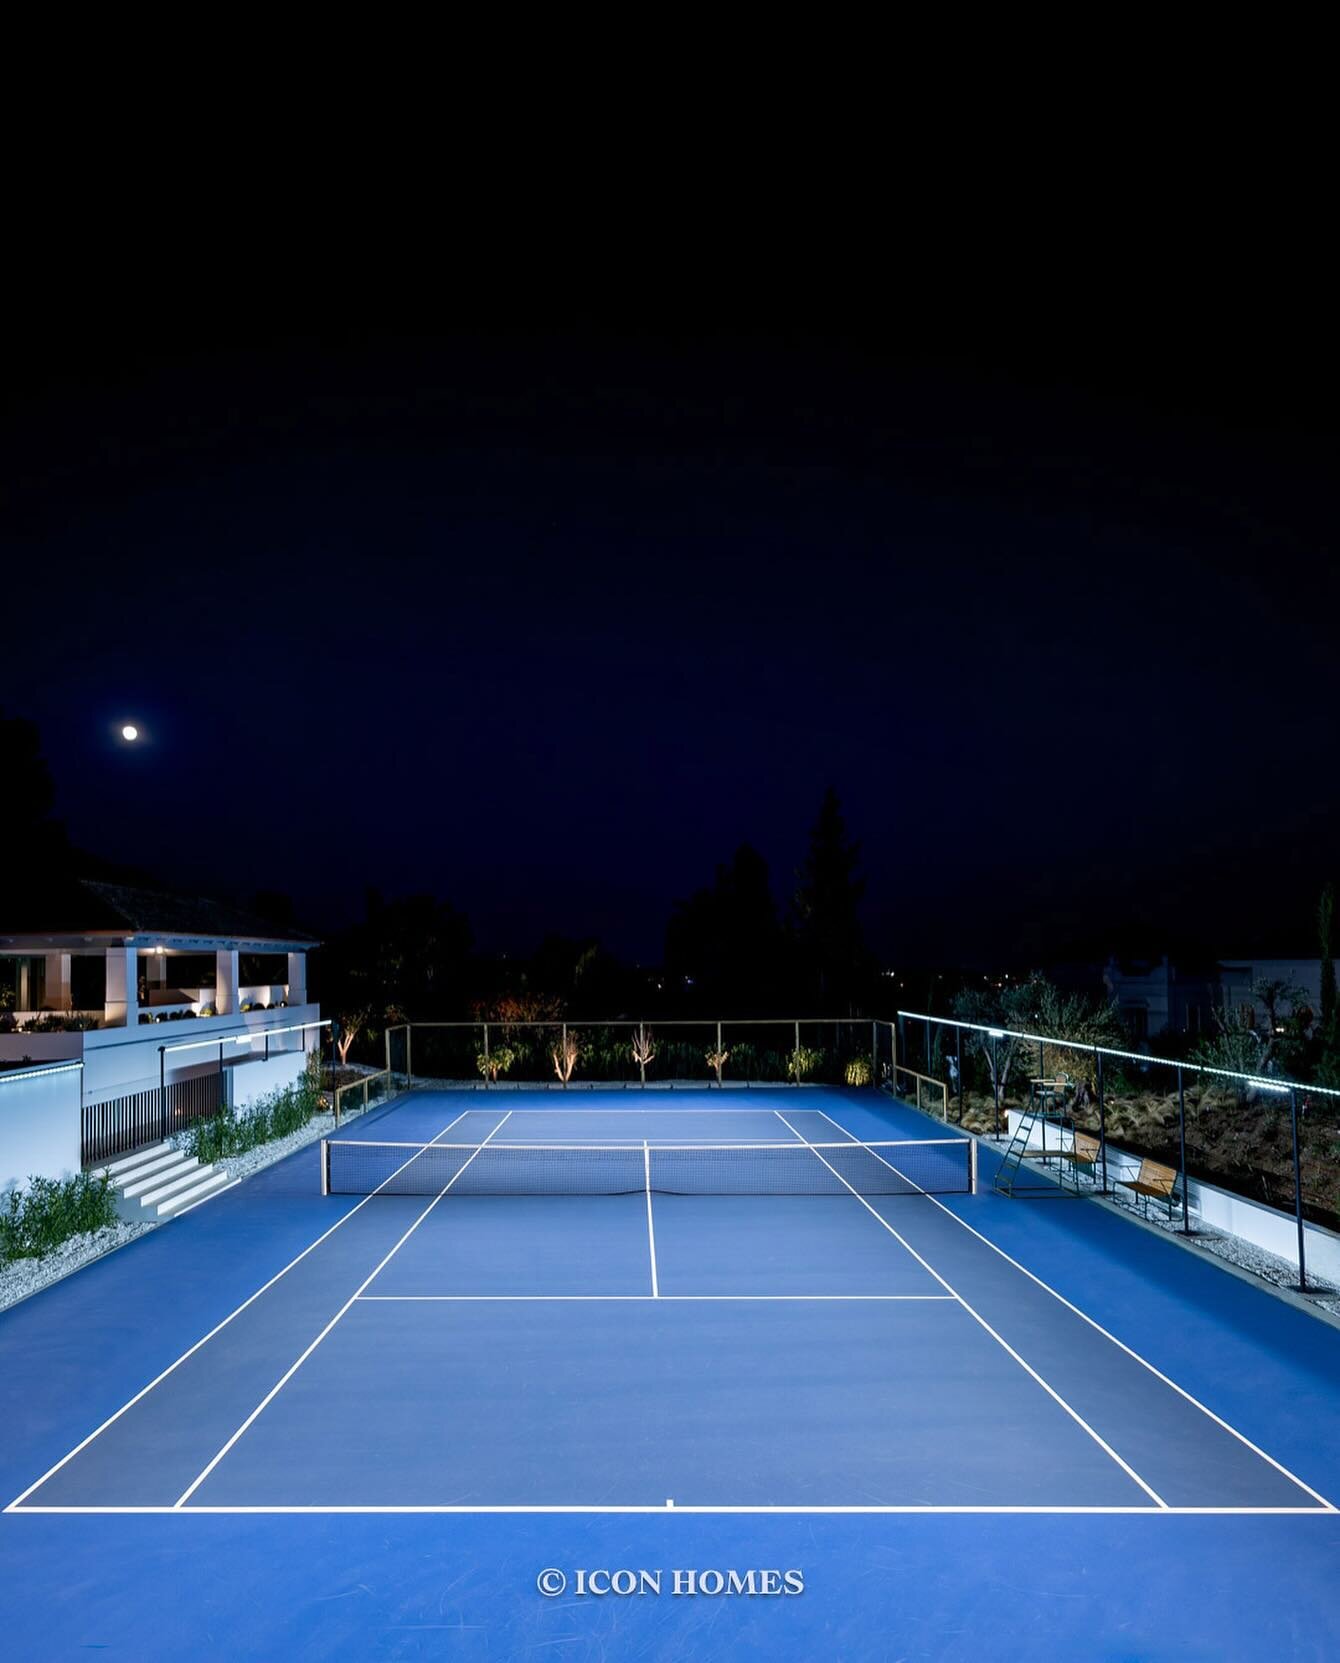 Proper centre court&hellip;

#Iconhomes #iconmarbella #icon #homes #conceptdesign #interiordesign #iconjournal #luxuryproperty #invest #crafting #property #propertyinvestor #propertydeveloper #advisor #architecture #design #develop #considered #space